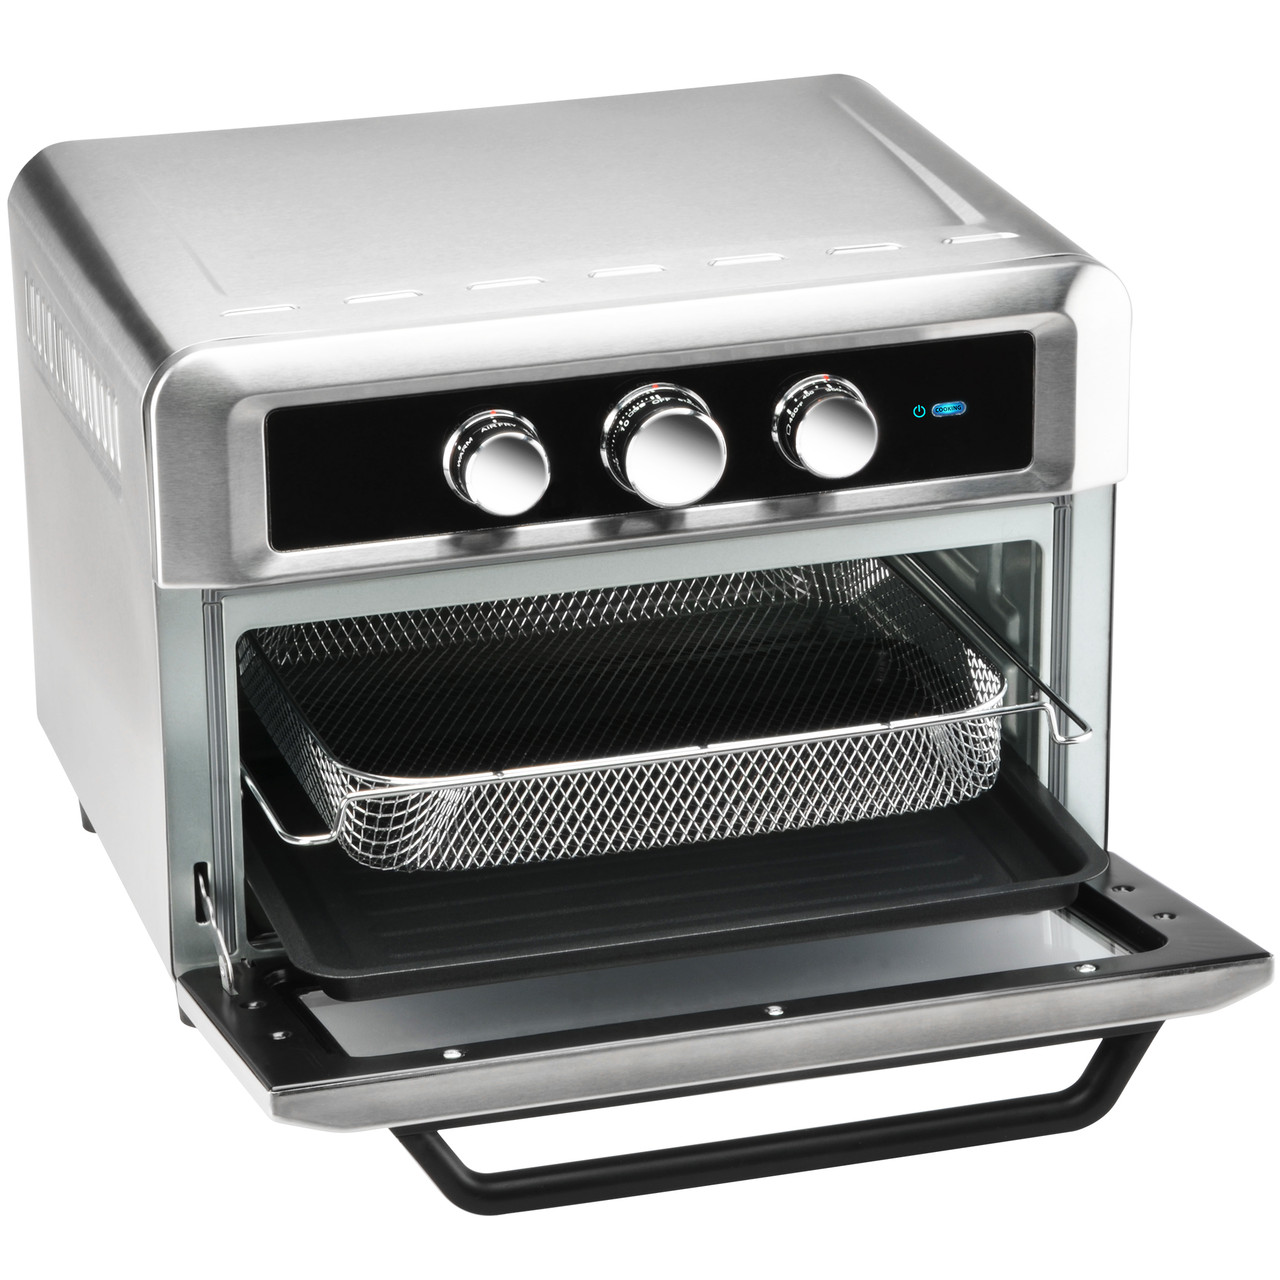 Toastmaster Air Frying Toaster Oven with Convection